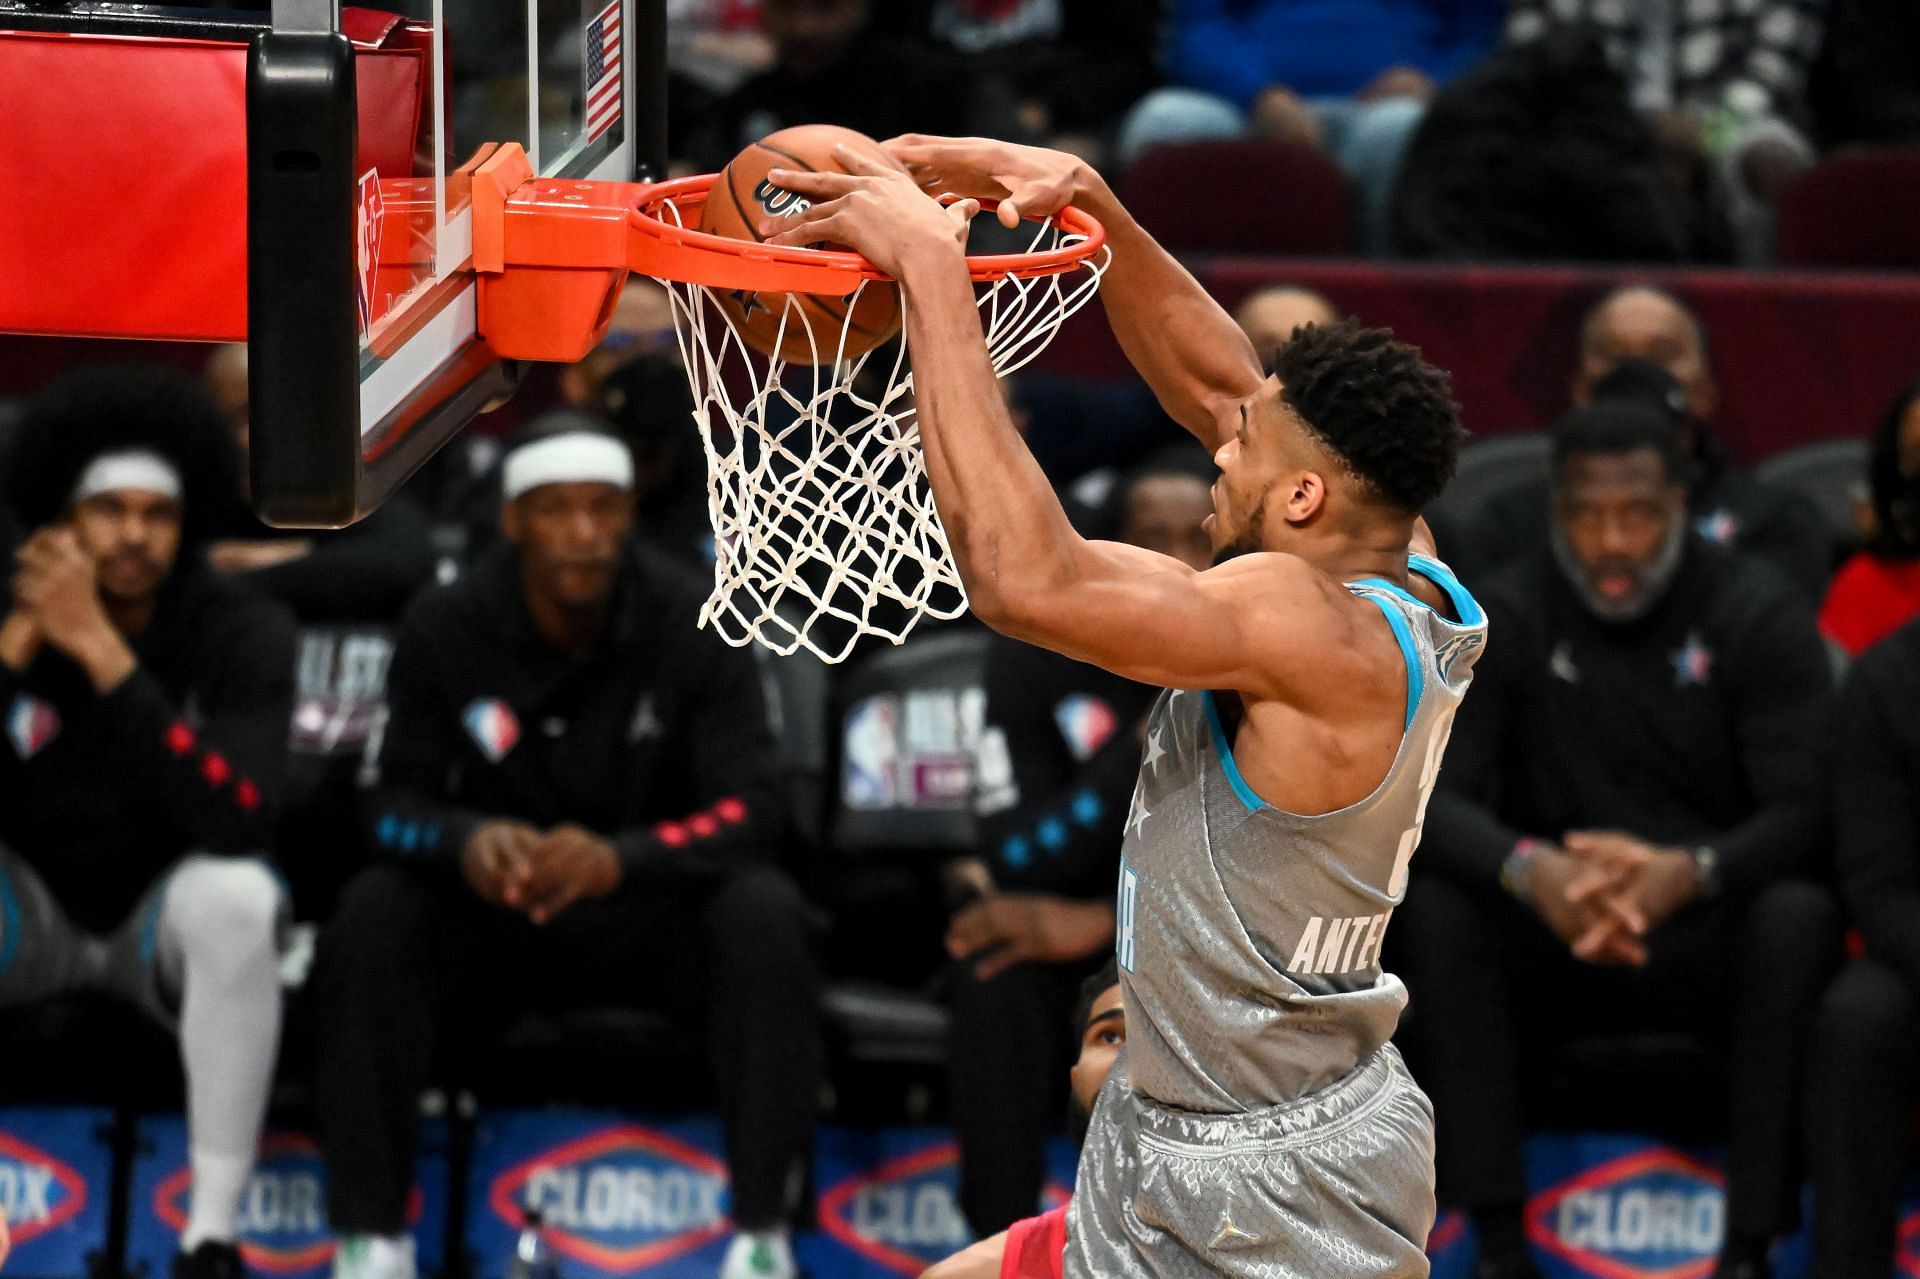 Giannis Antetokounmpo dunking during the 2022 NBA All-Star Game